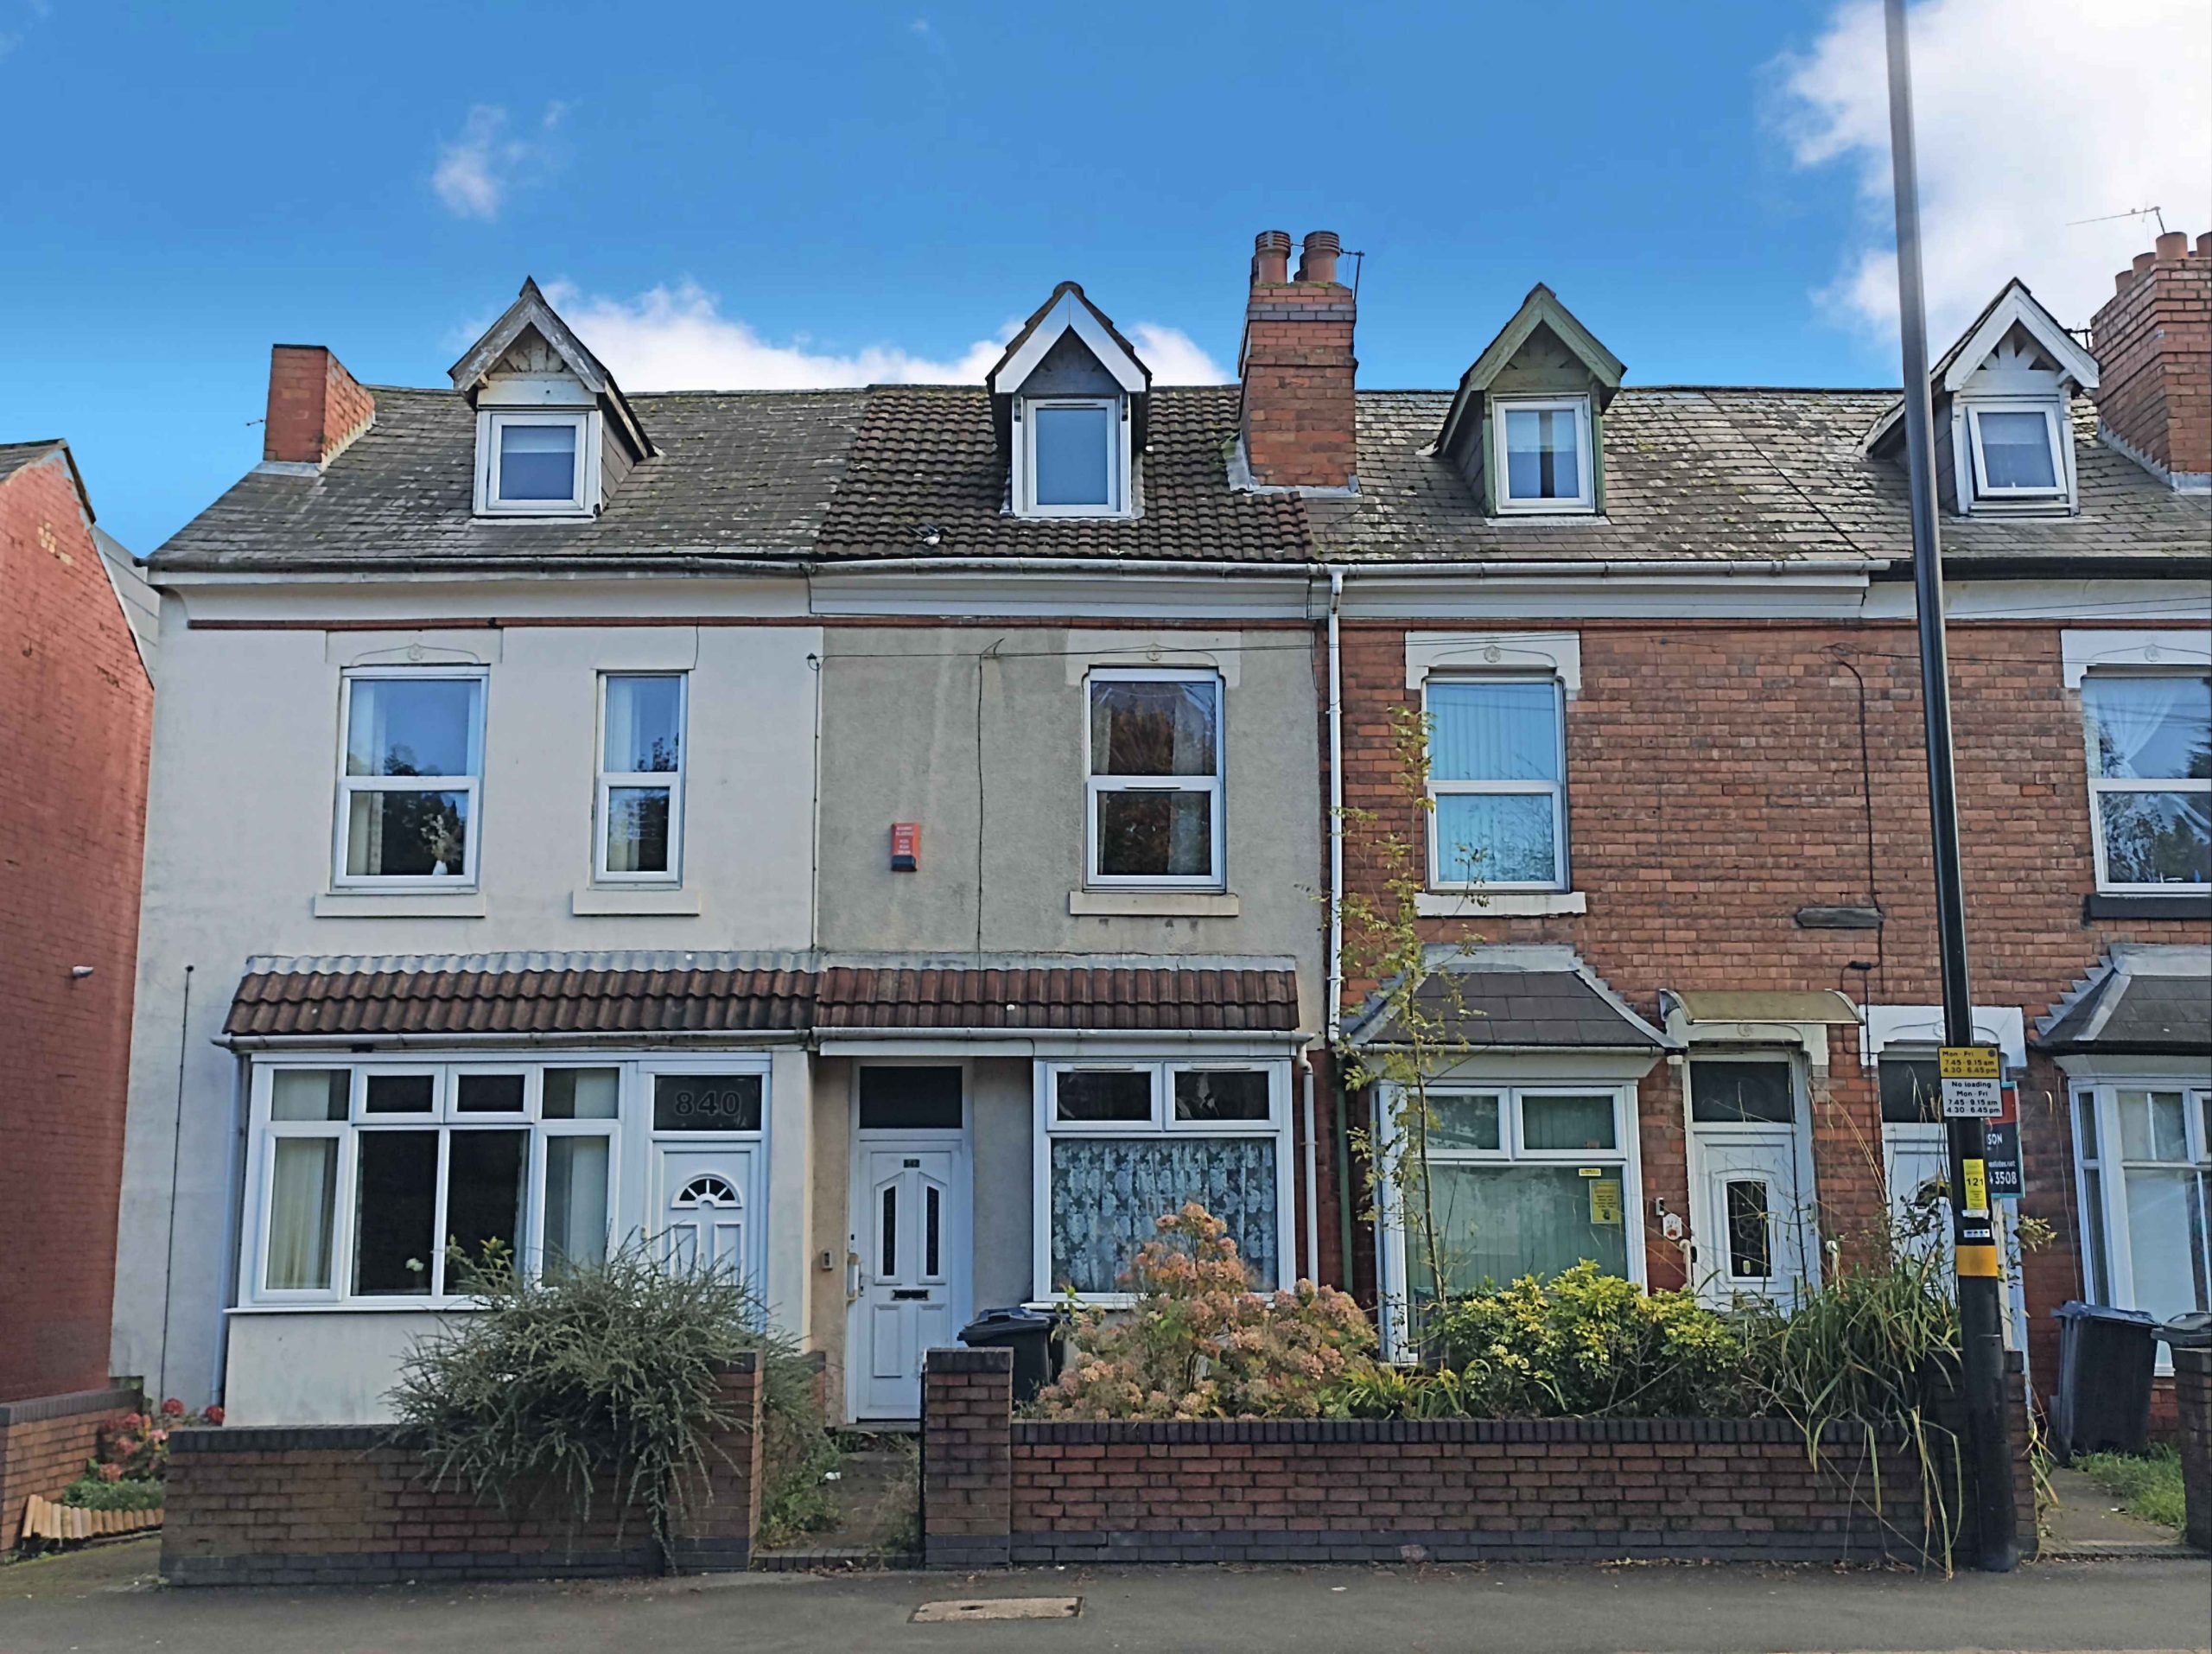 Bond Wolfe 842 Pershore Road scaled Two pairs of houses on same streets lead wide range of Birmingham properties at auction